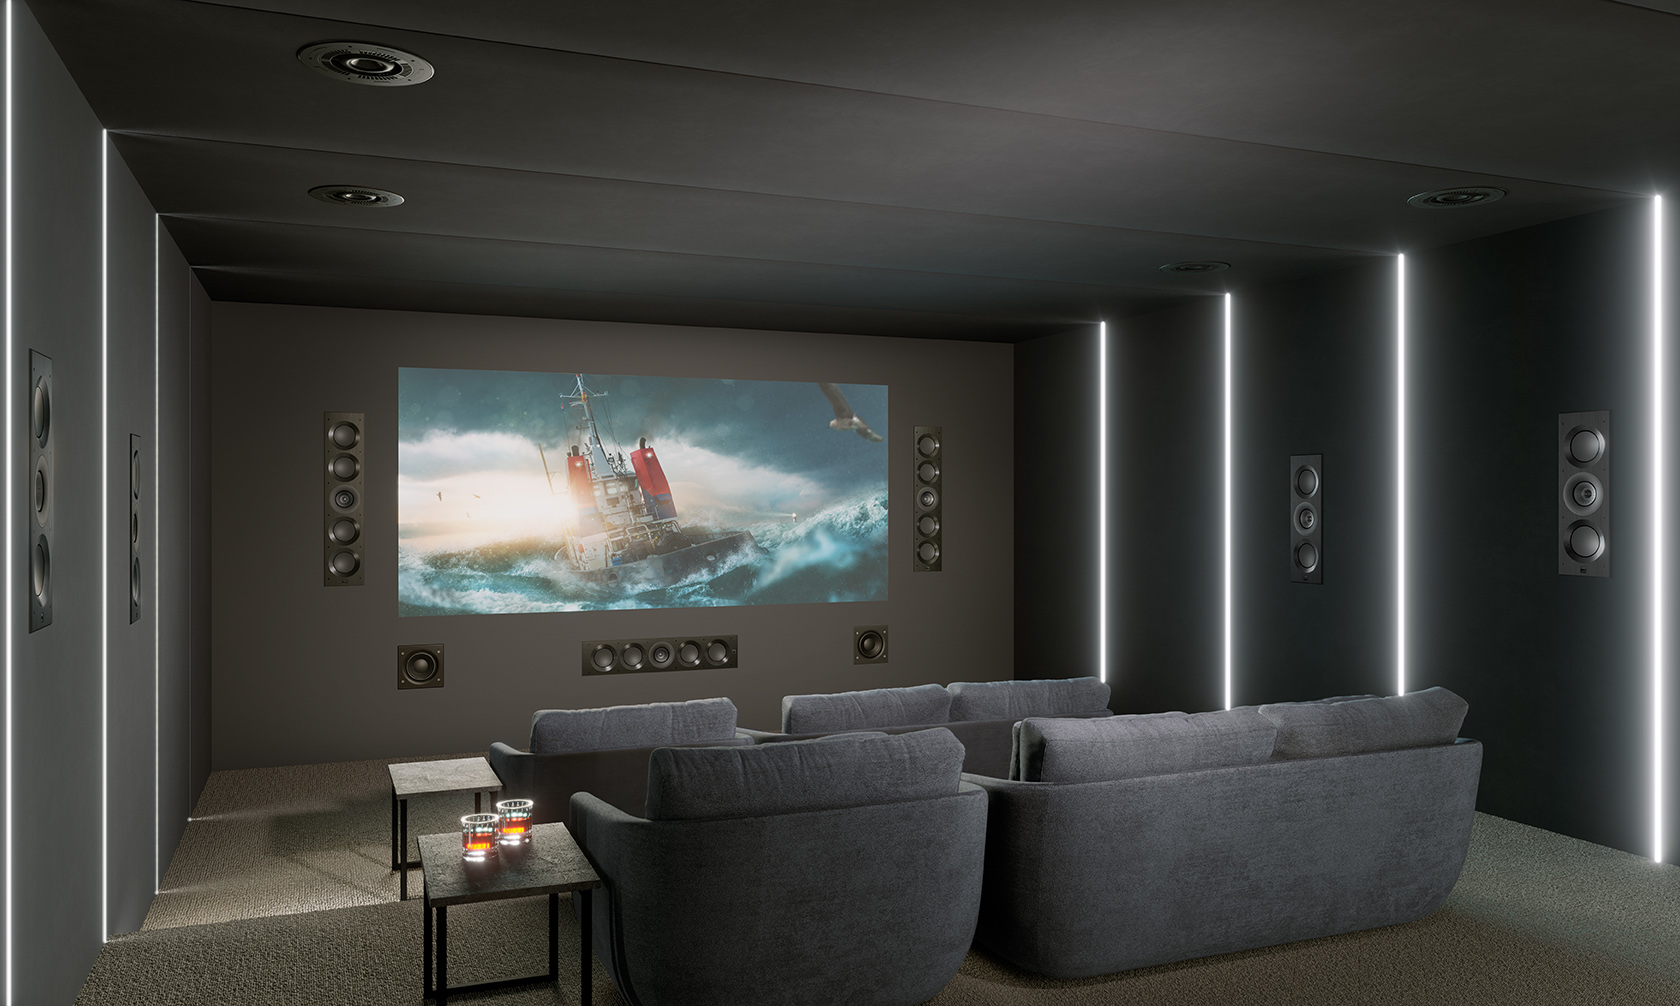 KEF Introduces New THX Certified Architectural Speakers